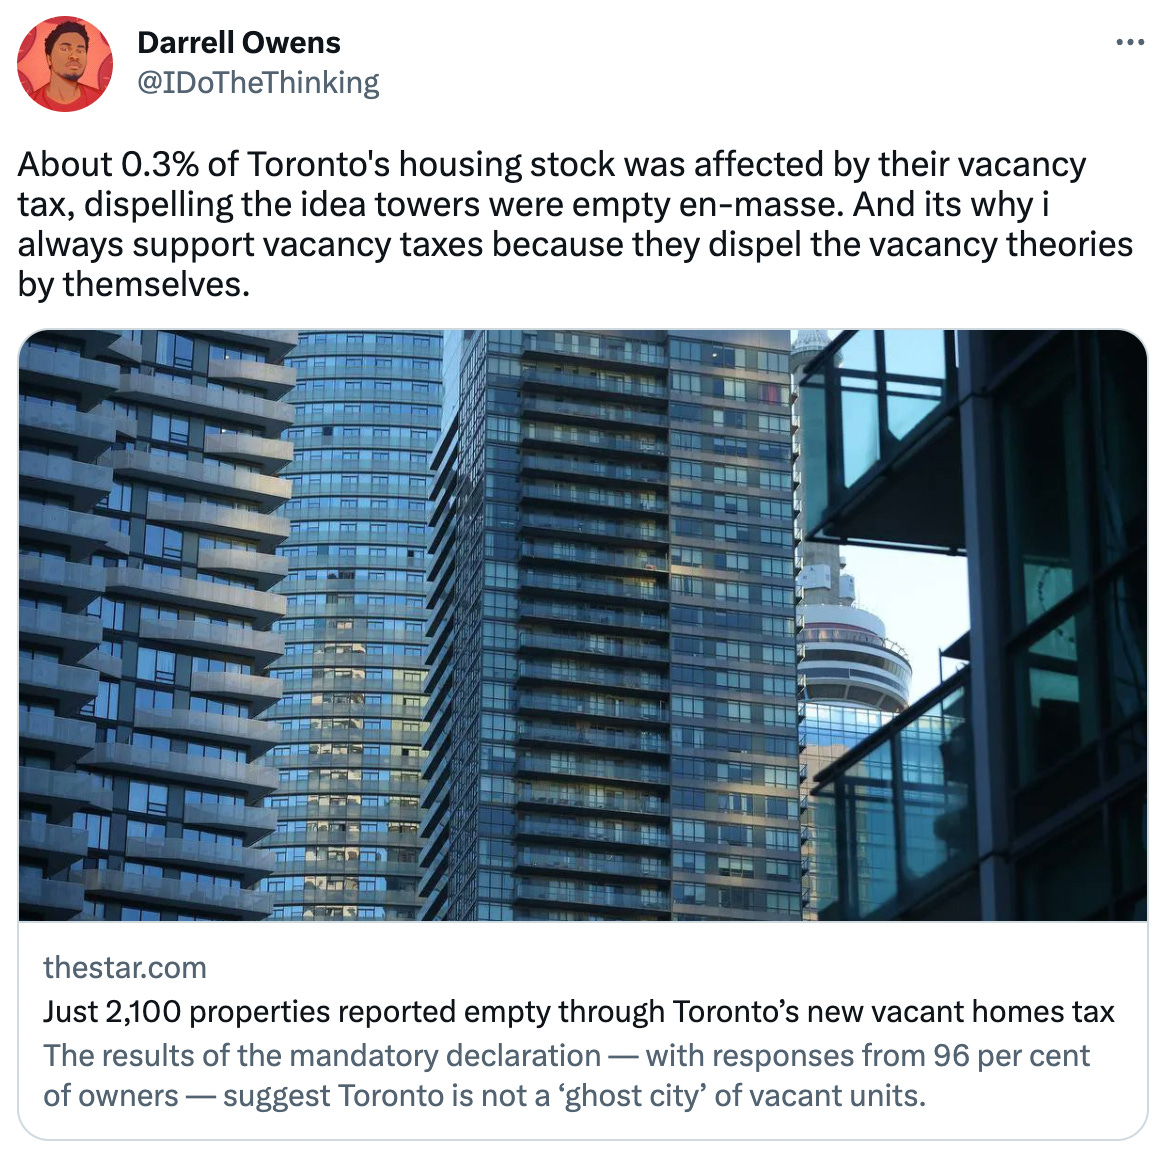  See new Tweets Conversation Darrell Owens @IDoTheThinking About 0.3% of Toronto's housing stock was affected by their vacancy tax, dispelling the idea towers were empty en-masse. And its why i always support vacancy taxes because they dispel the vacancy theories by themselves.